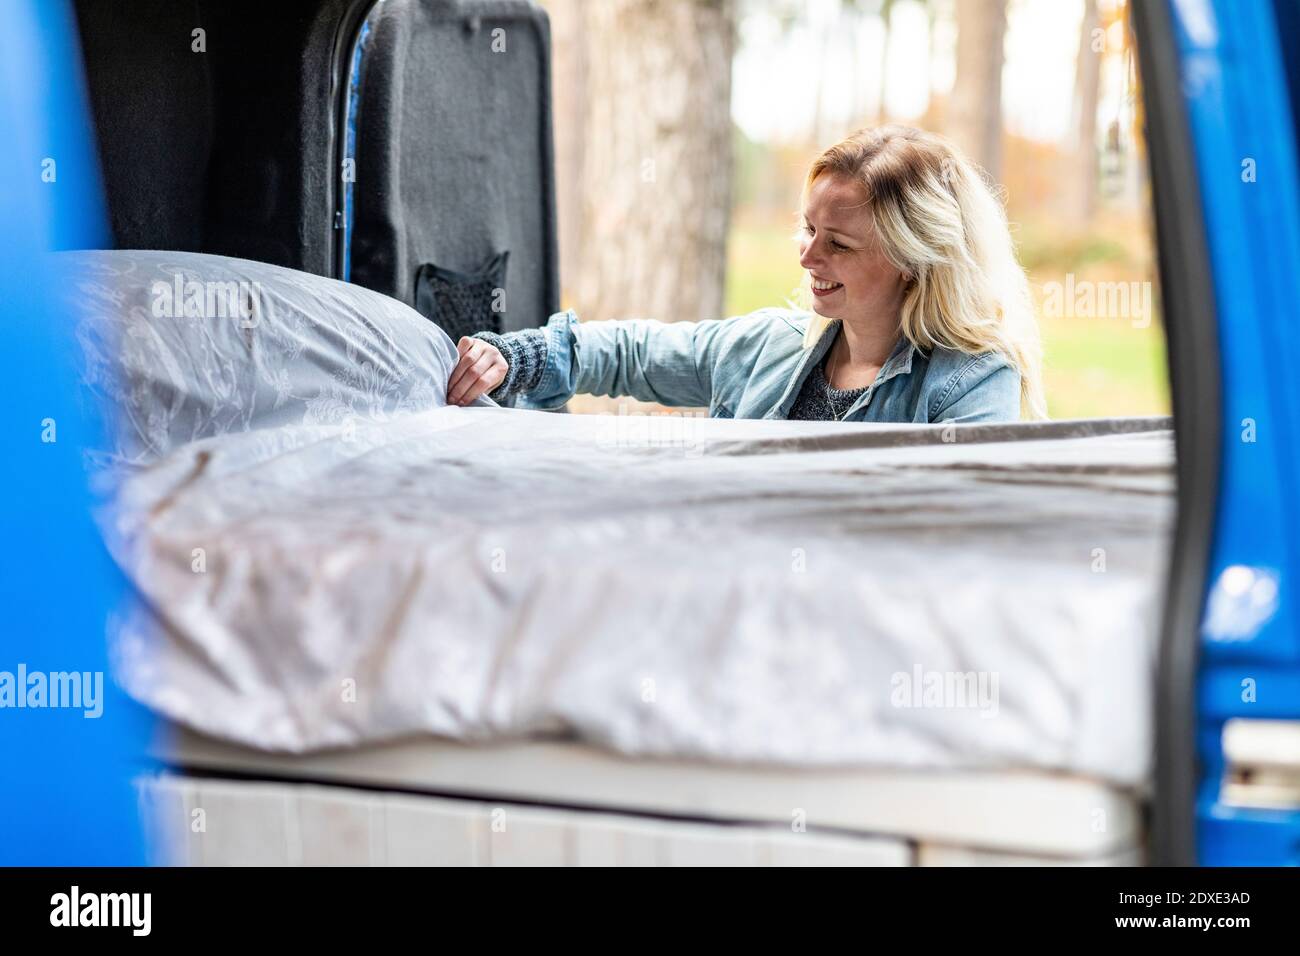 Smiling woman adjusting bed in motor home Stock Photo